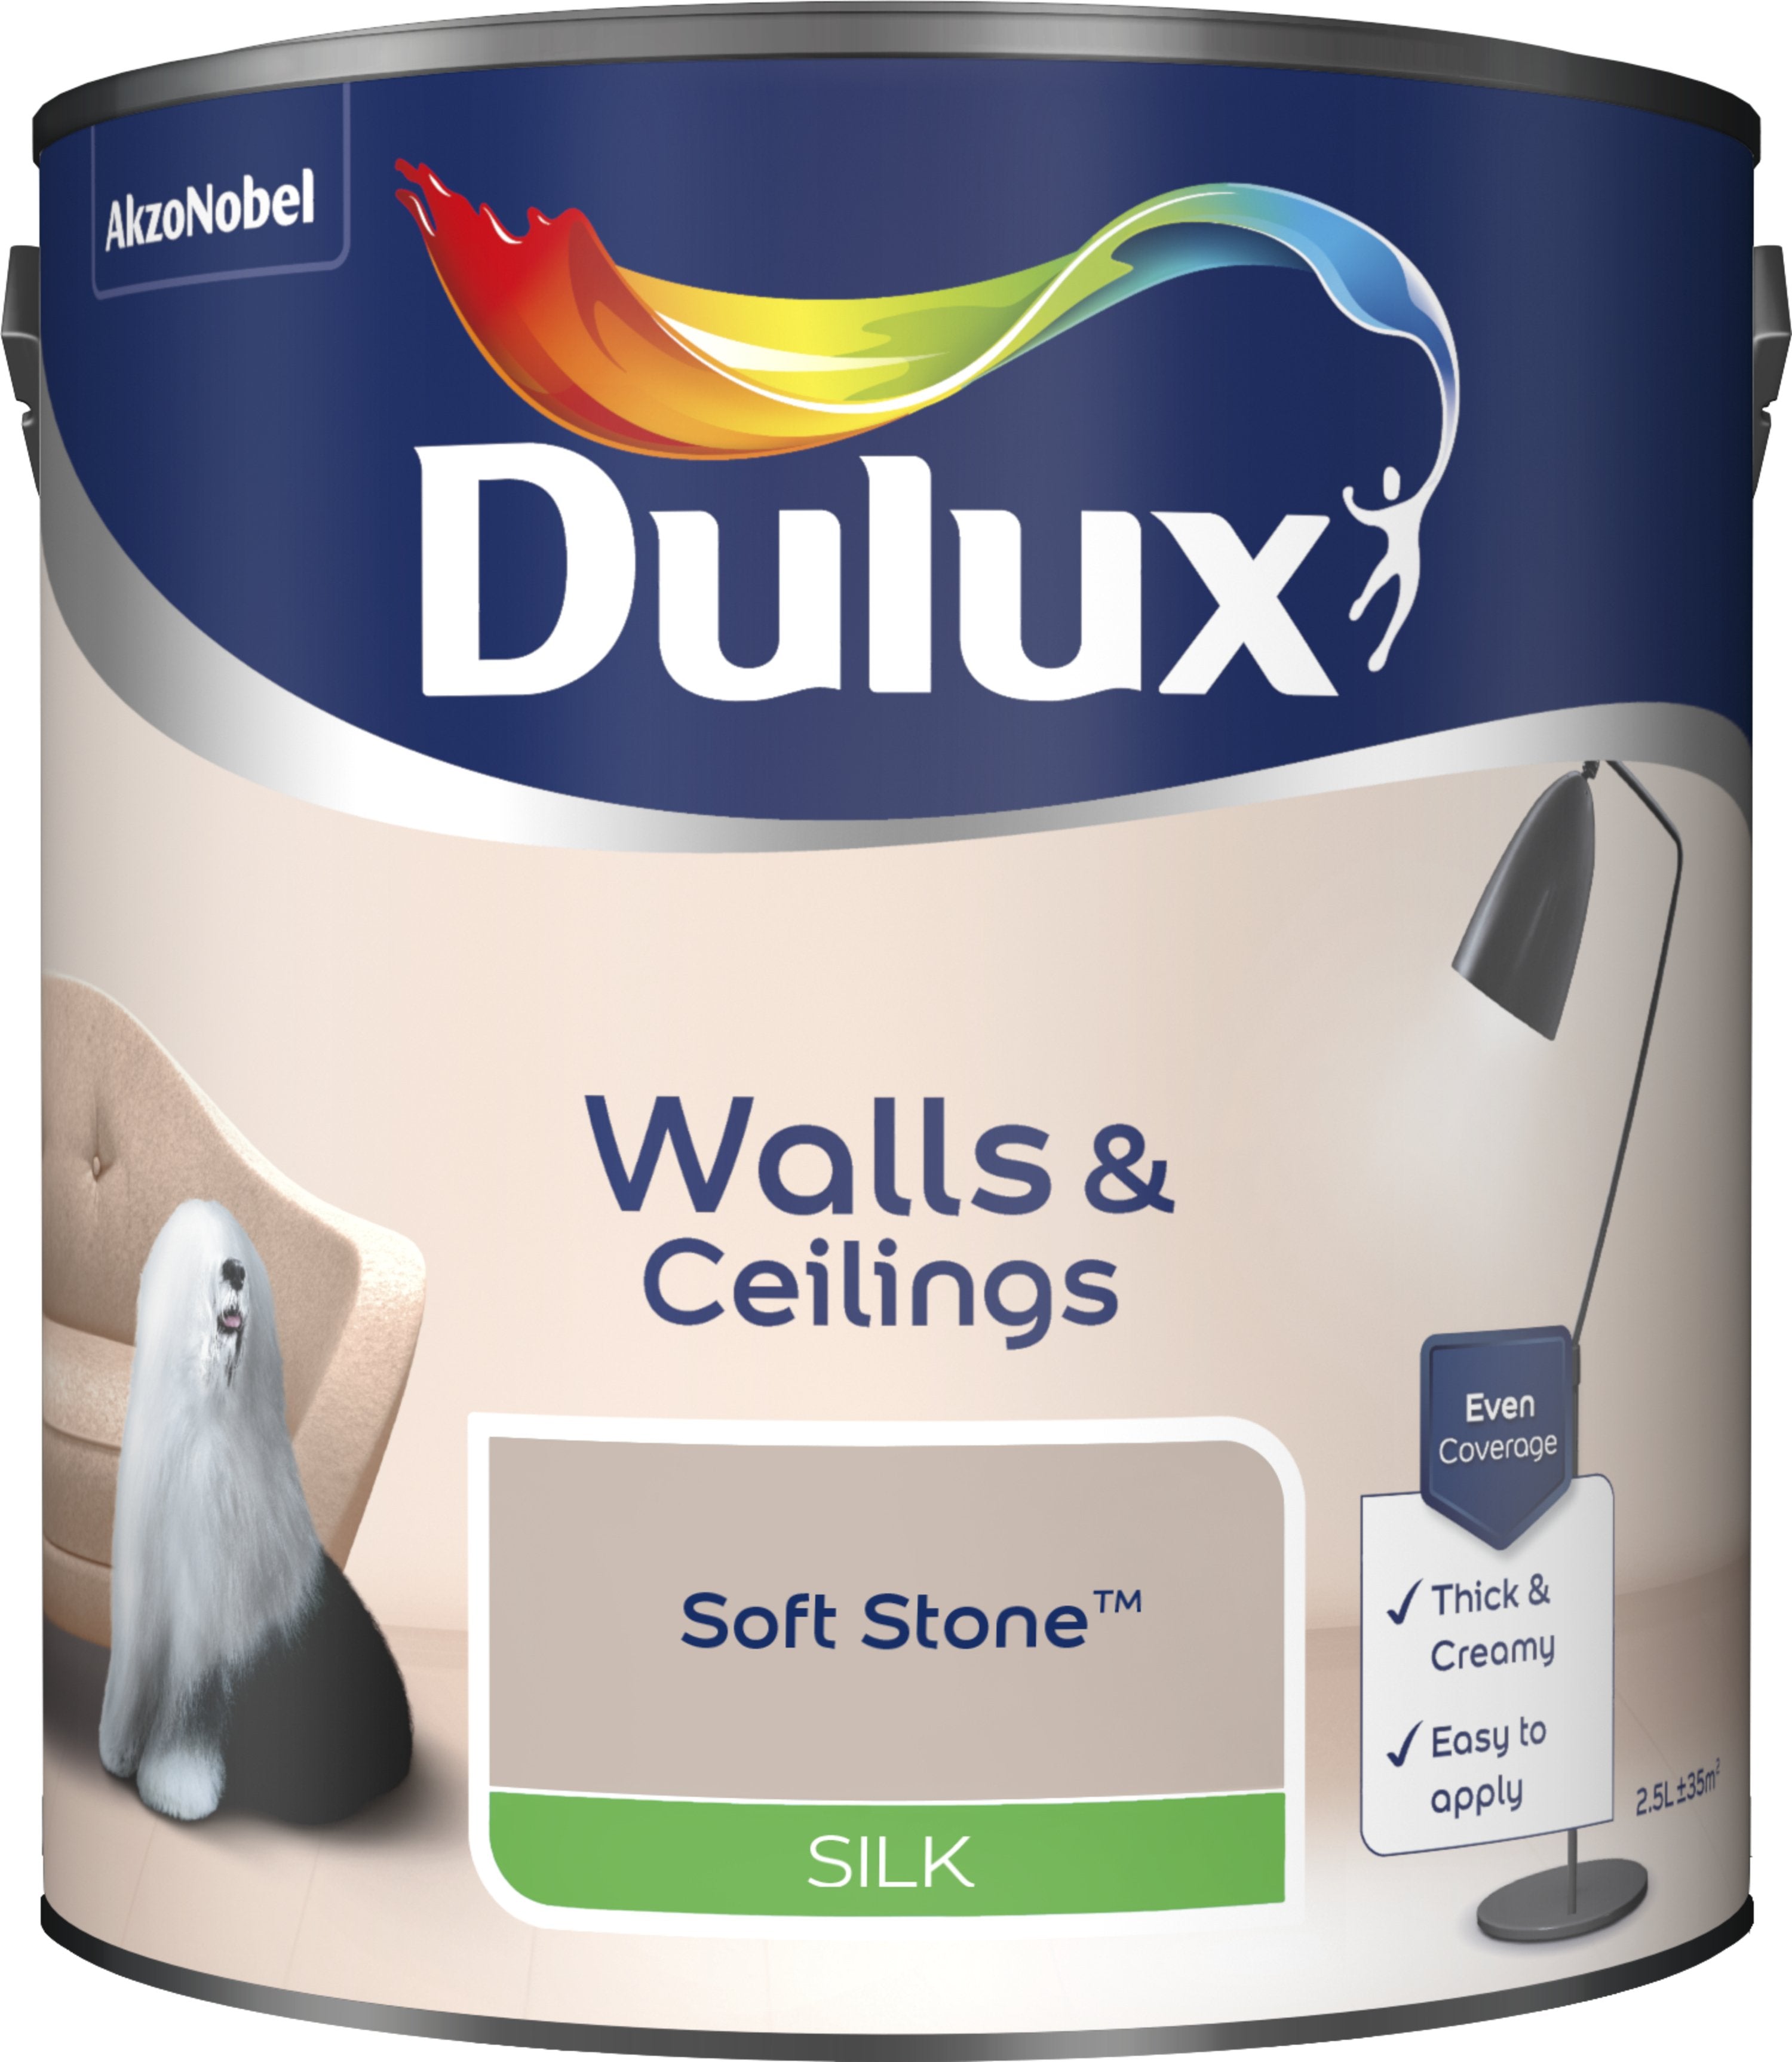 Dulux Silk Emulsion Paint For Walls And Ceilings - Soft Stone 2.5L Garden & Diy  Home Improvements  